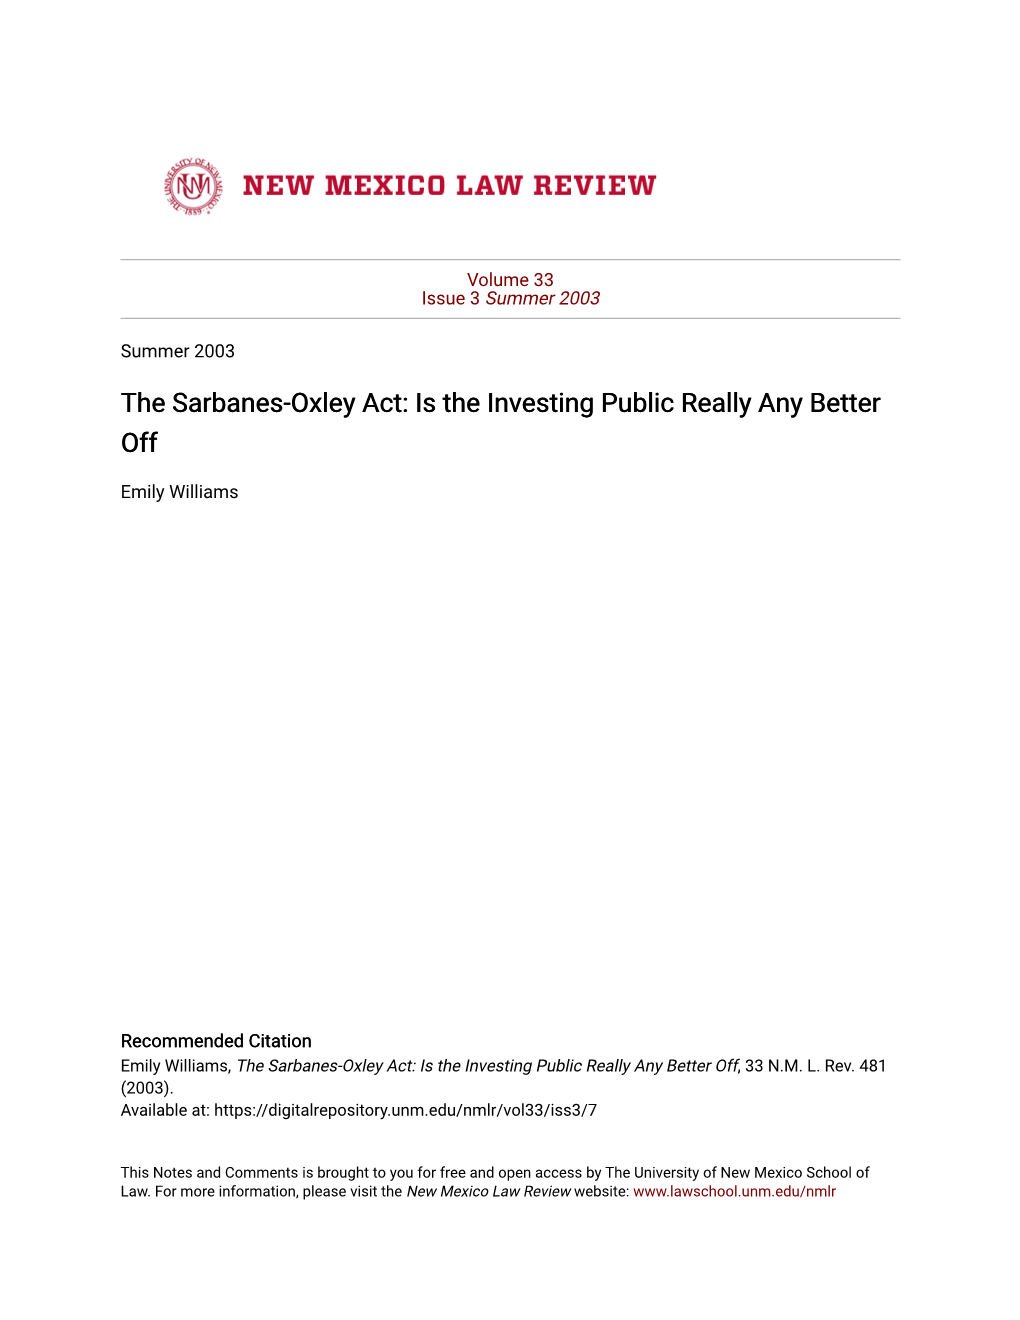 The Sarbanes-Oxley Act: Is the Investing Public Really Any Better Off